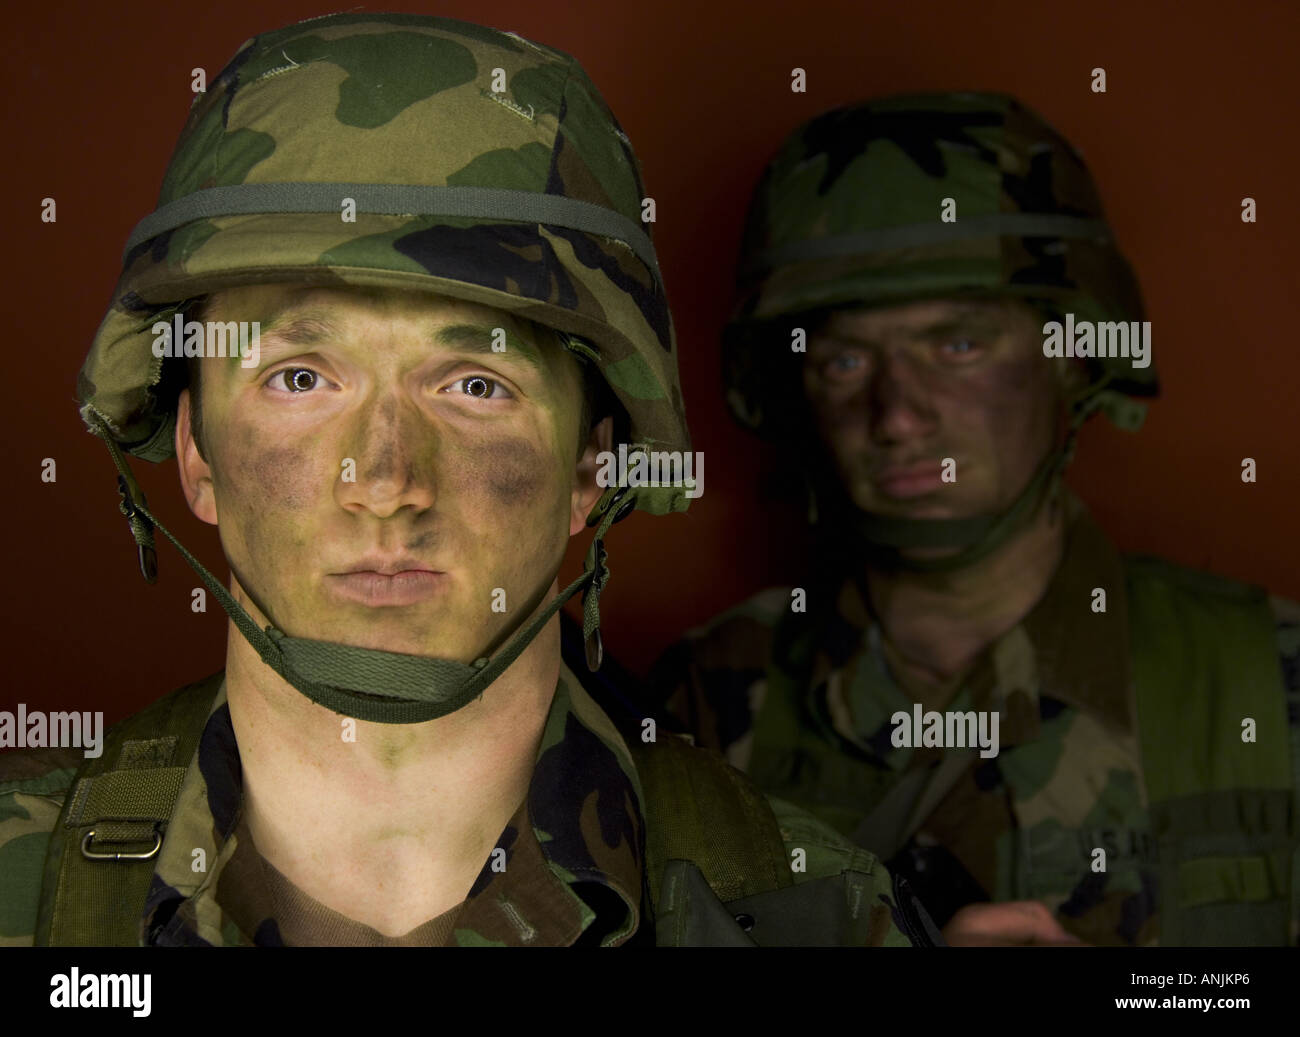 Portrait of a soldier with another soldier standing behind him Stock Photo